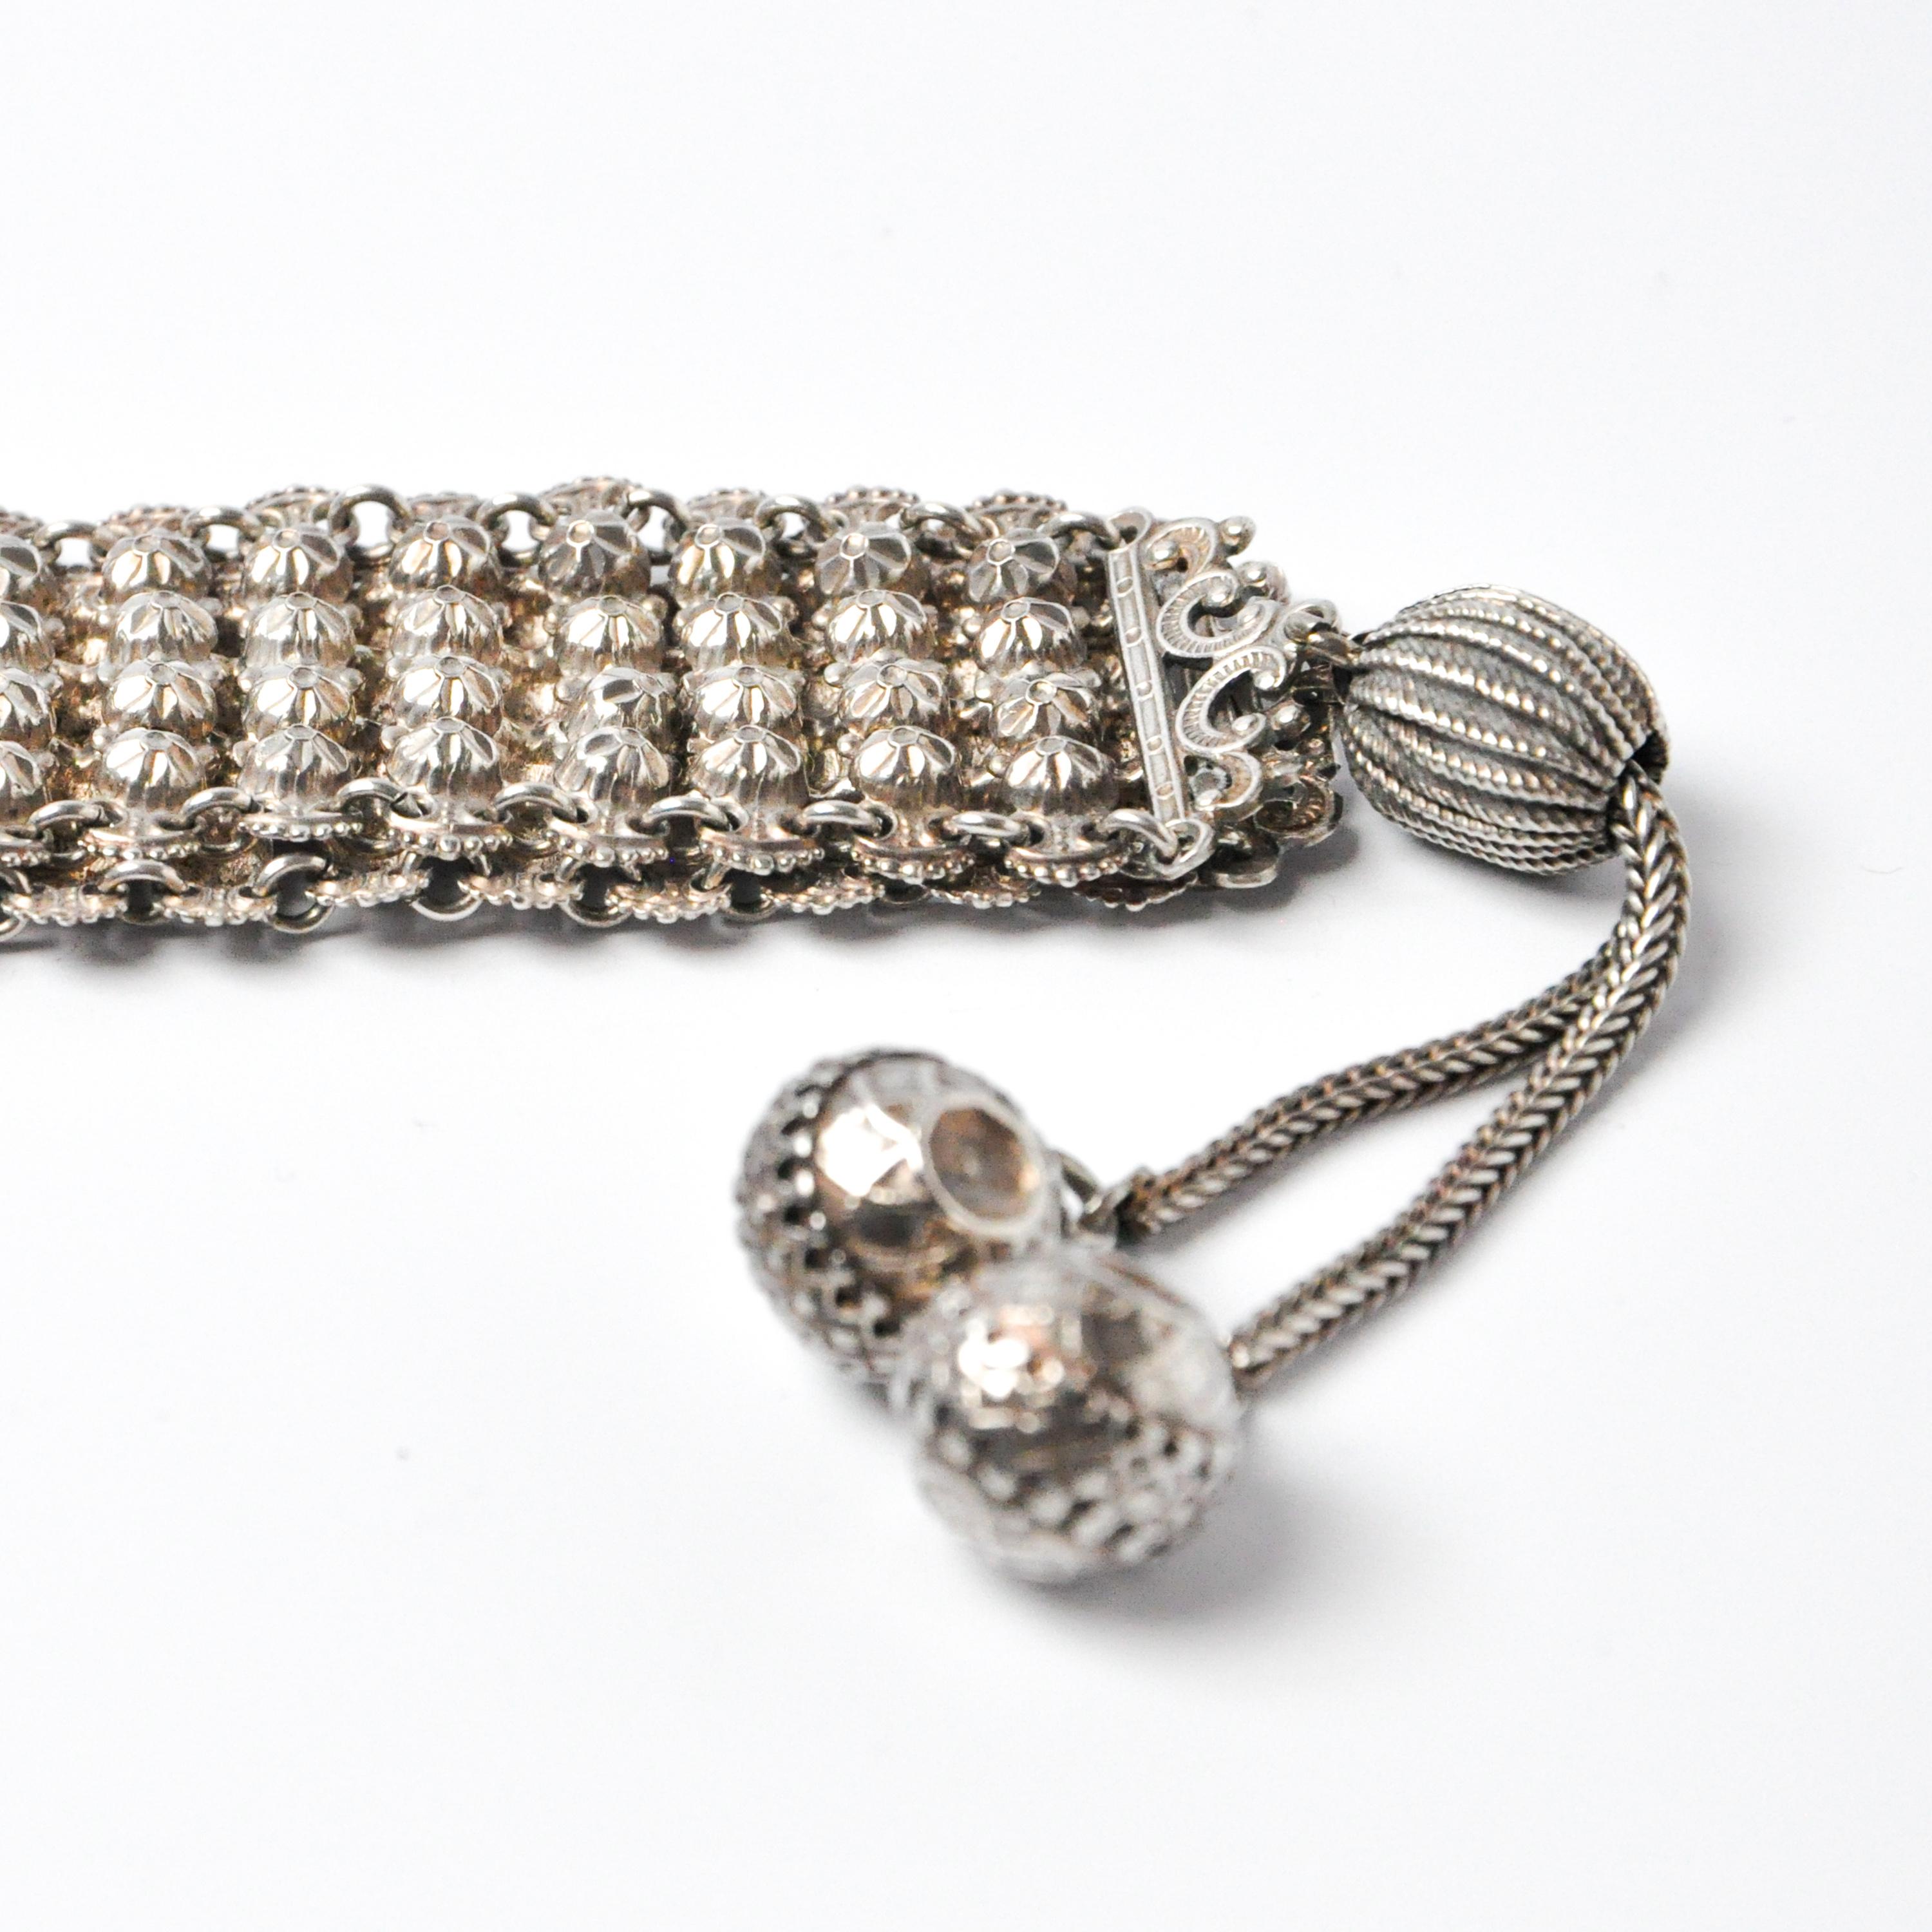 This Dutch 1920's 4-row woven chain bracelet is a maze of shapes and textures characterize by this vintage bracelet. The bracelet is full of geometric figures. The style is typical of the early twenties of the twentieth century. 

The bracelet looks